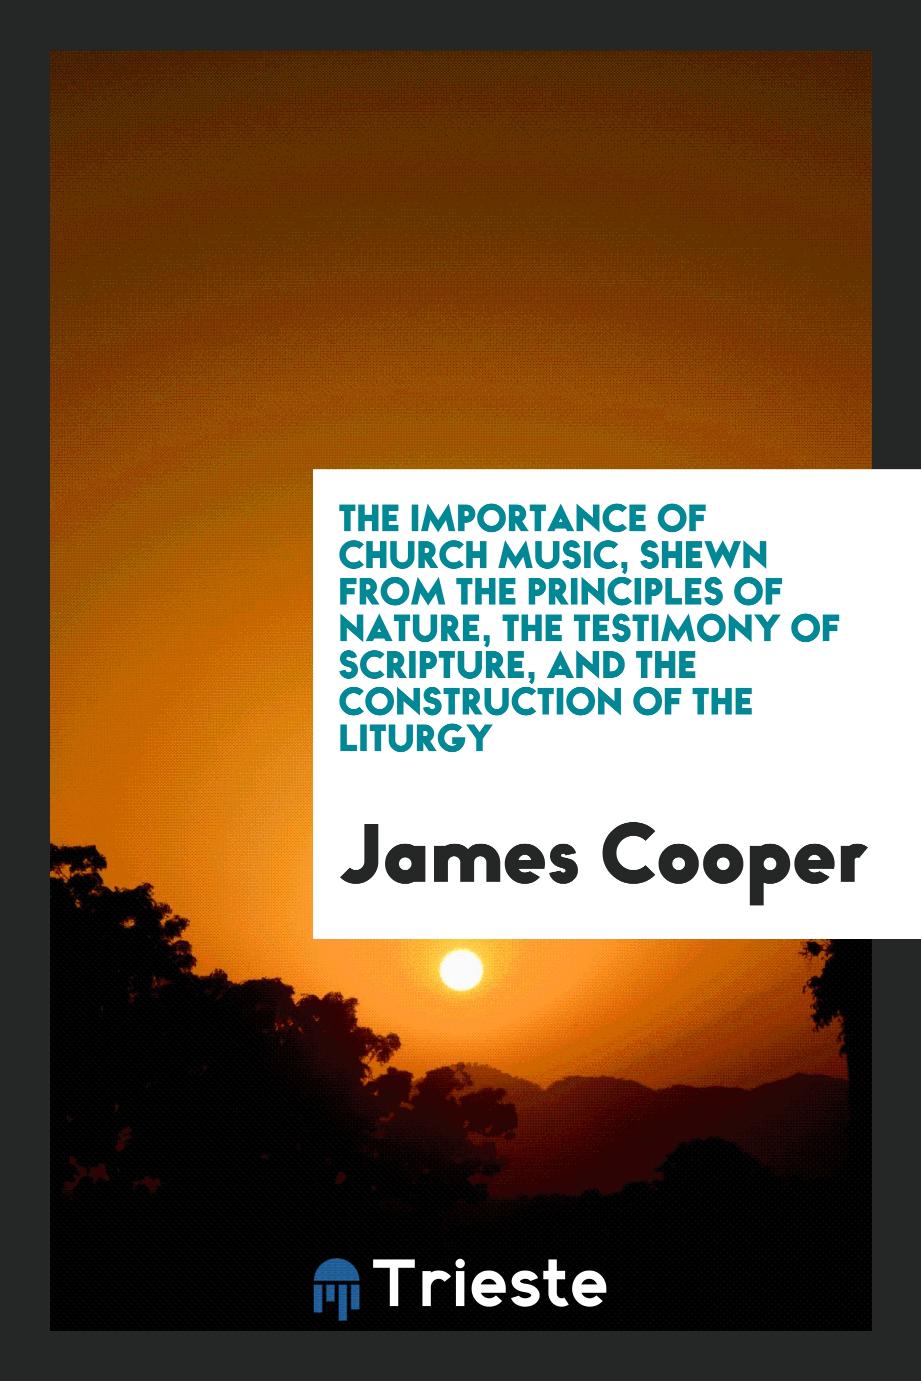 The importance of Church music, shewn from the principles of nature, the testimony of scripture, and the construction of the liturgy